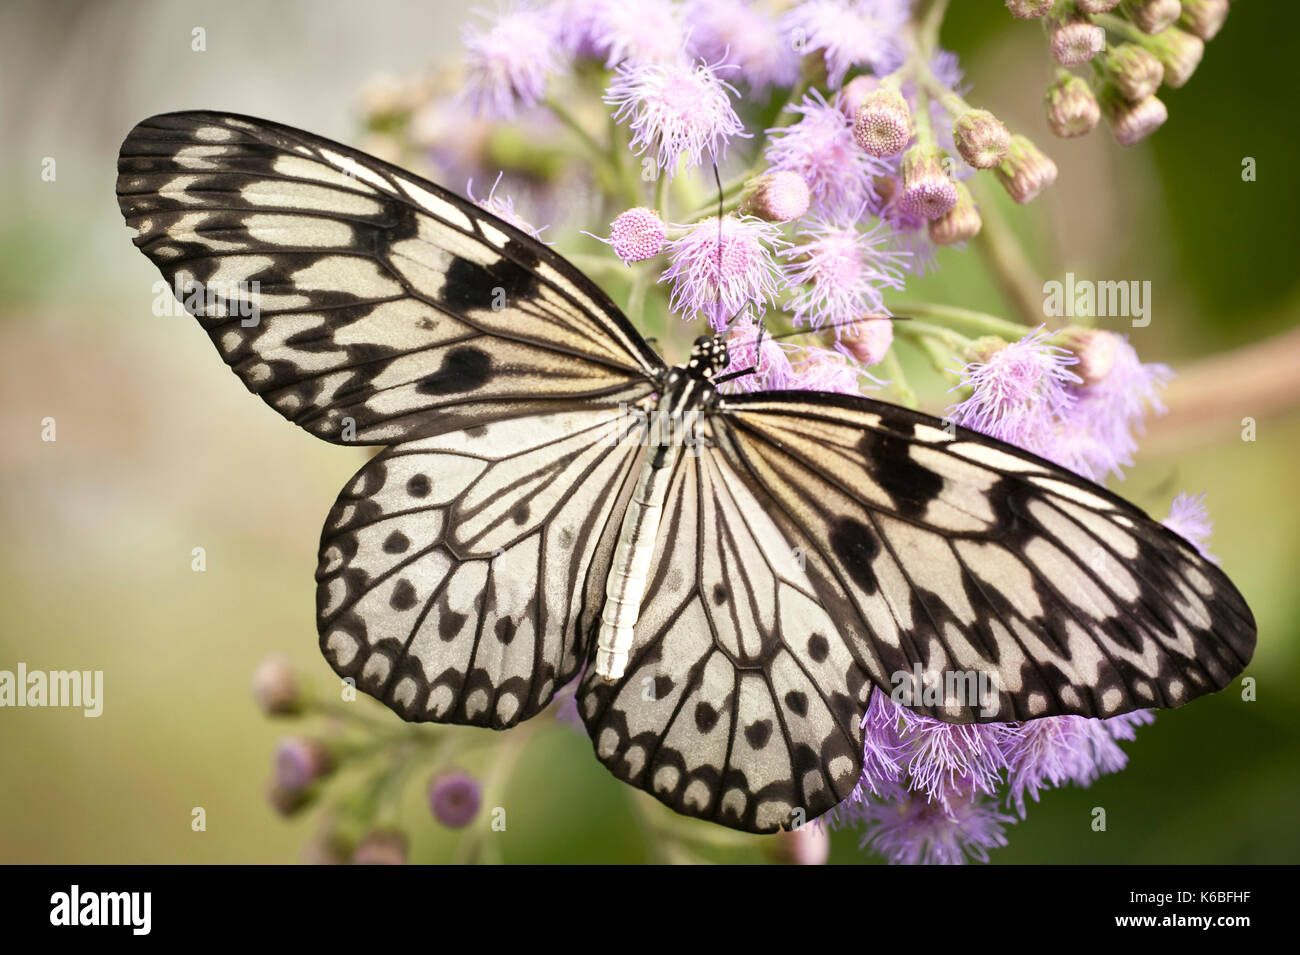 Tree Nymph Butterfly, Idea leuconoe, South Asia, delicate, black and white colours, Paper Kite, Rice Paper, wings open resting on flower Stock Photo